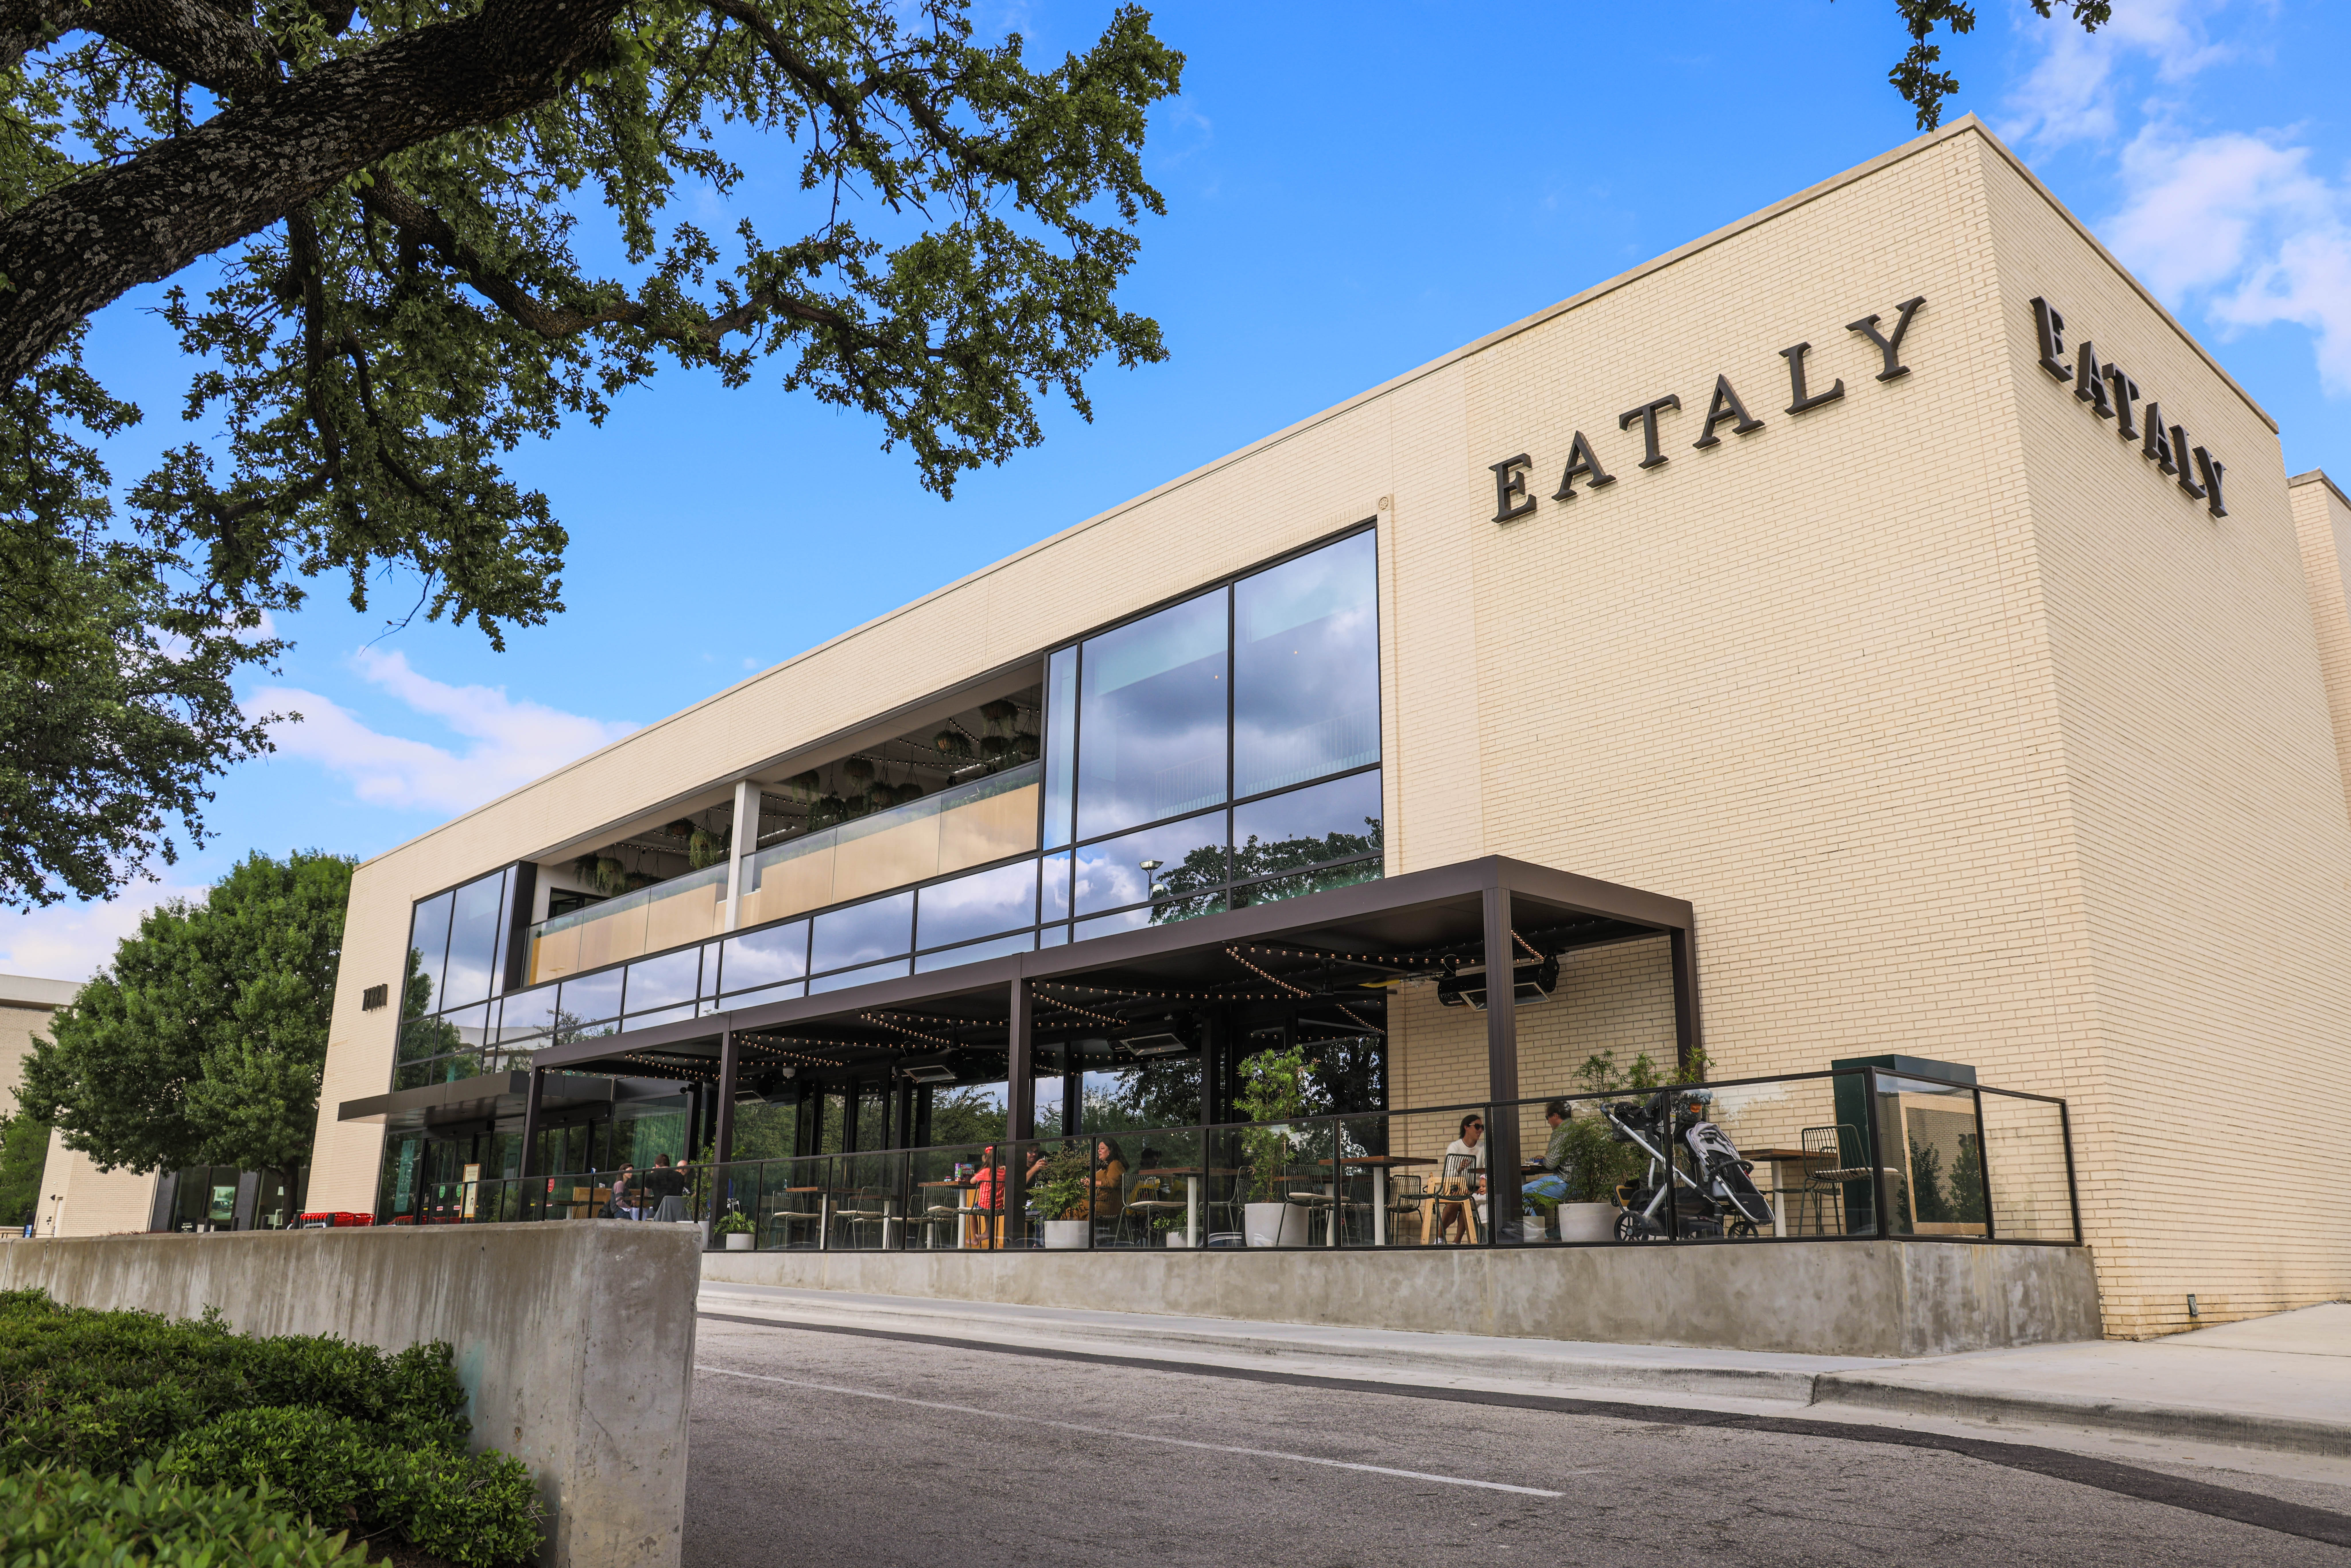 The exterior corner of a large building in cream-colored brick expansive windows and a sign that reads “Eataly.”